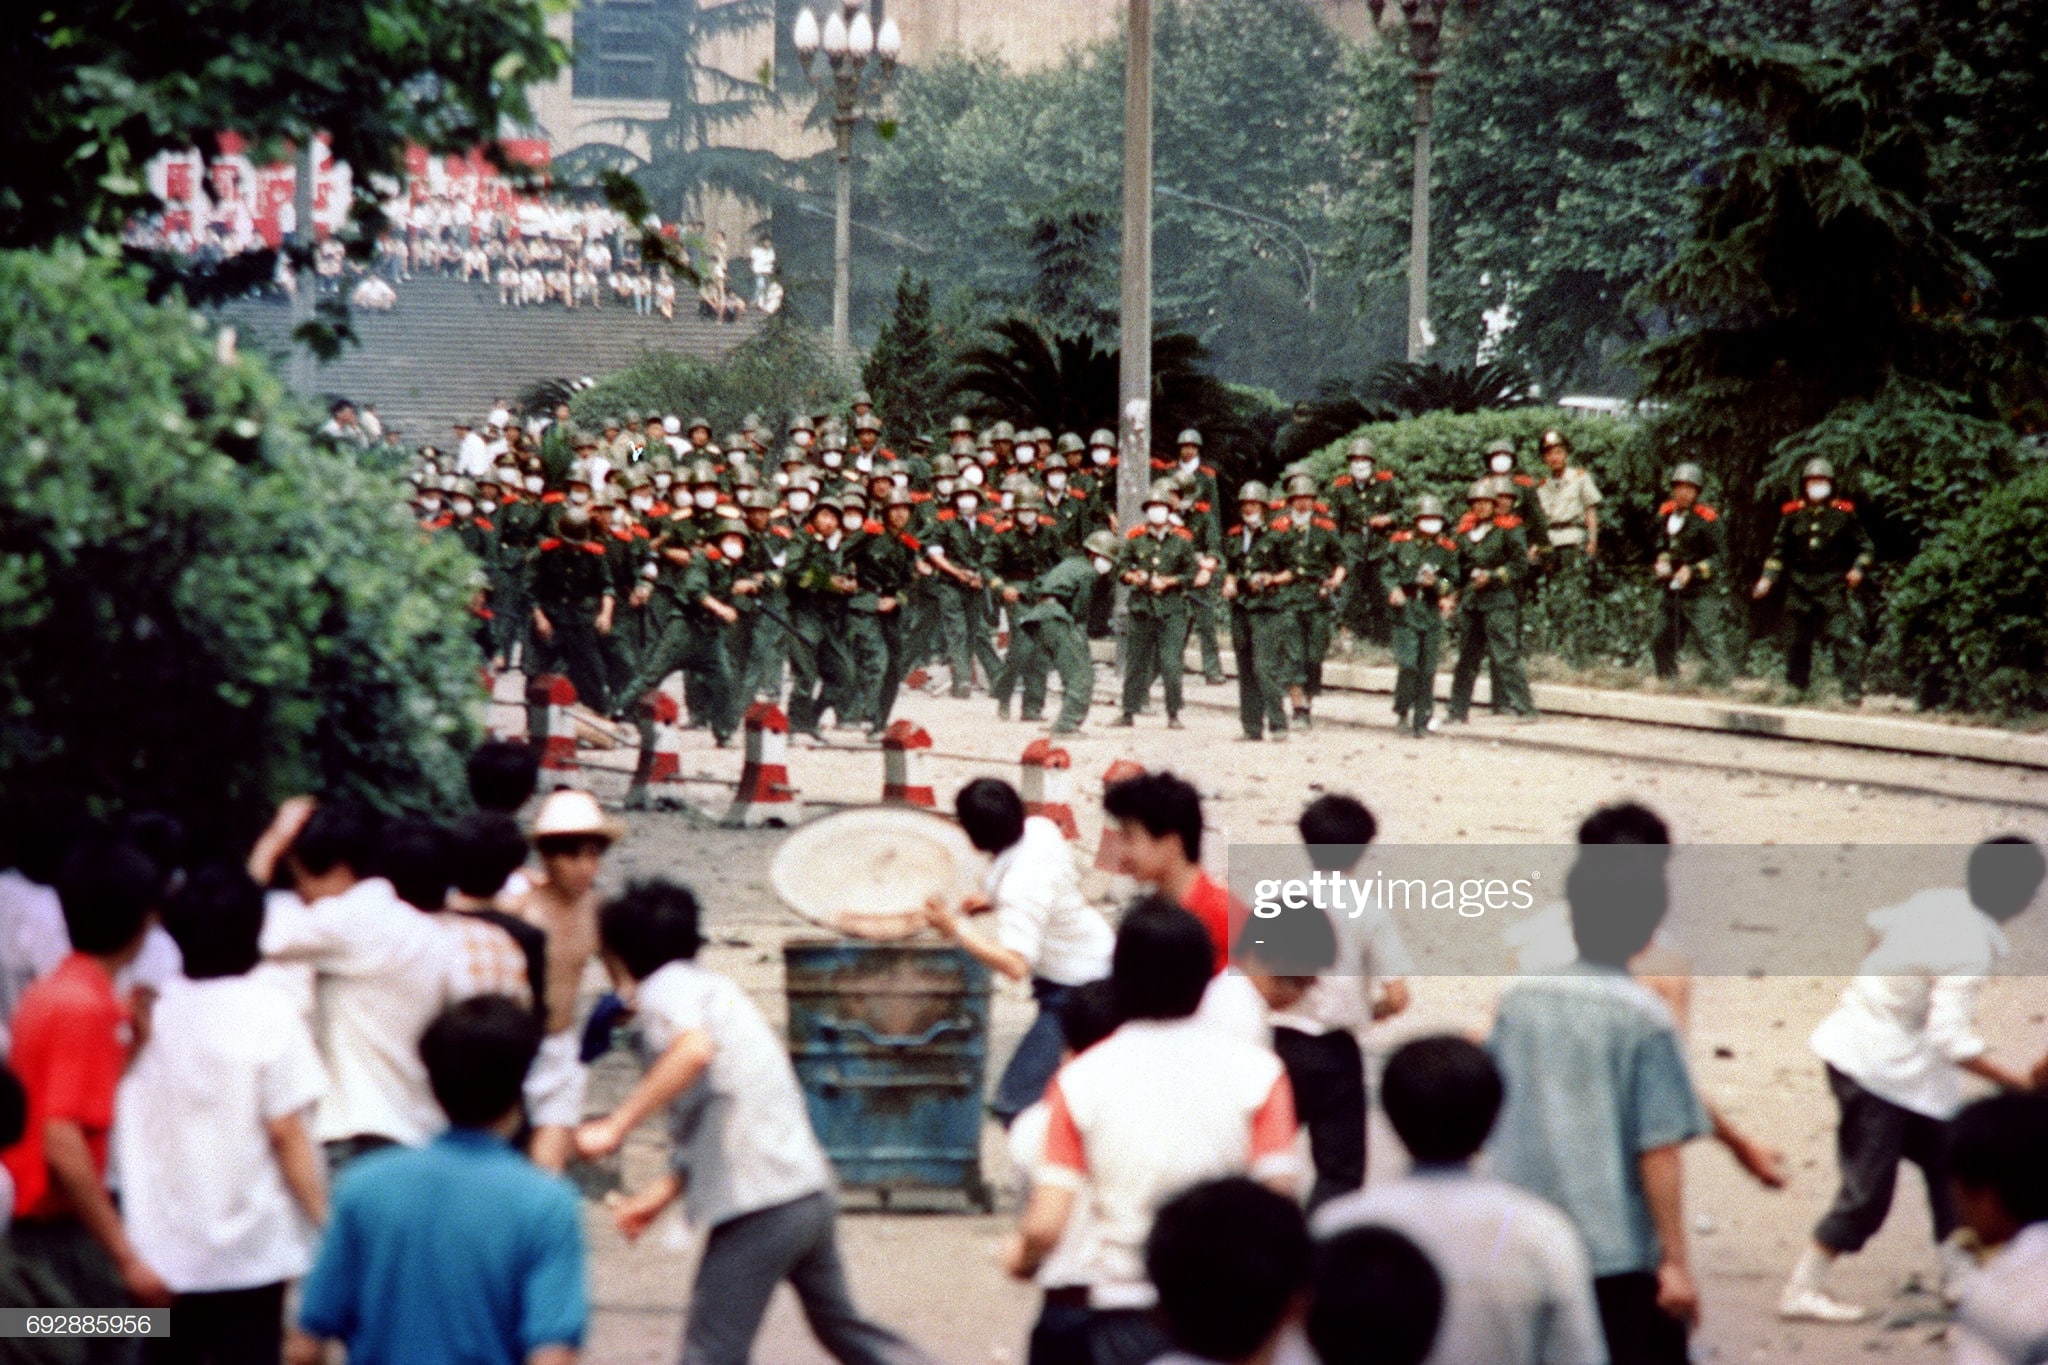 Chinese citizens and students of Chengdu capital of Sichuan province hurl stones at troop on June 4 1989 during a rioting following the proclamation of the martial in the city A series of pro-democracy protests was sparked by the April 15 death of former communist party leader Hu Yaobang In a show of force China leaders vented their fury and frustration on student dissidents and their pro-democracy supporters Several hundred people have been killed and thousands wounded when soldiers moved on Tiananmen Square during a violent military crackdown ending six weeks of student demonstrations known as the Beijing Spring movement According to Amnesty International five years after the crushing of the Chinese pro-democracy movement thousands of prisoners remained in jail AFP PHOTO STAFF Photo by - AFP Photo credit should read -AFPGetty Images